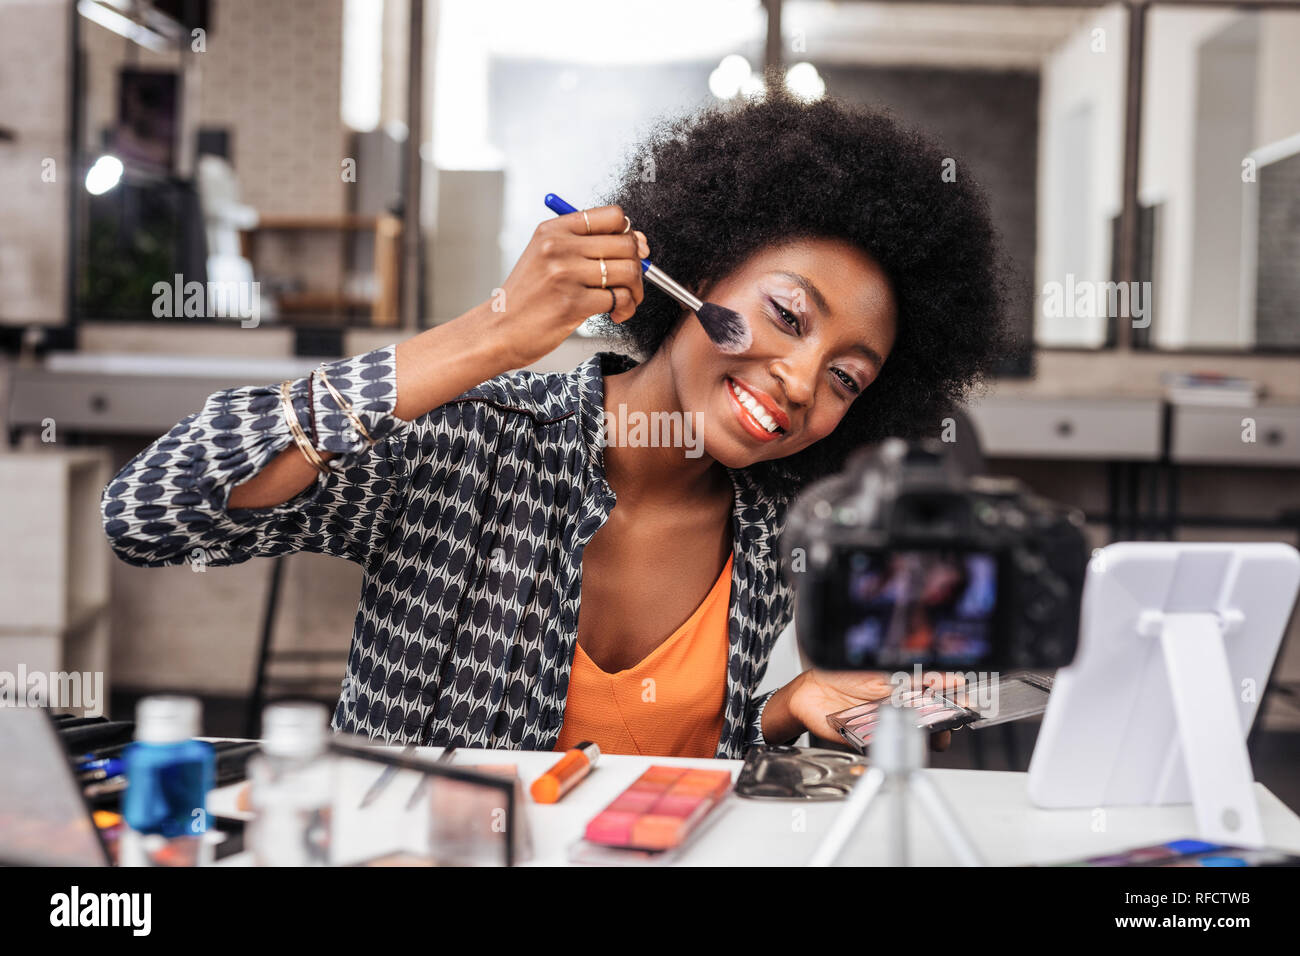 Pretty dark-skinned woman with bright makeup feeling amused Stock Photo